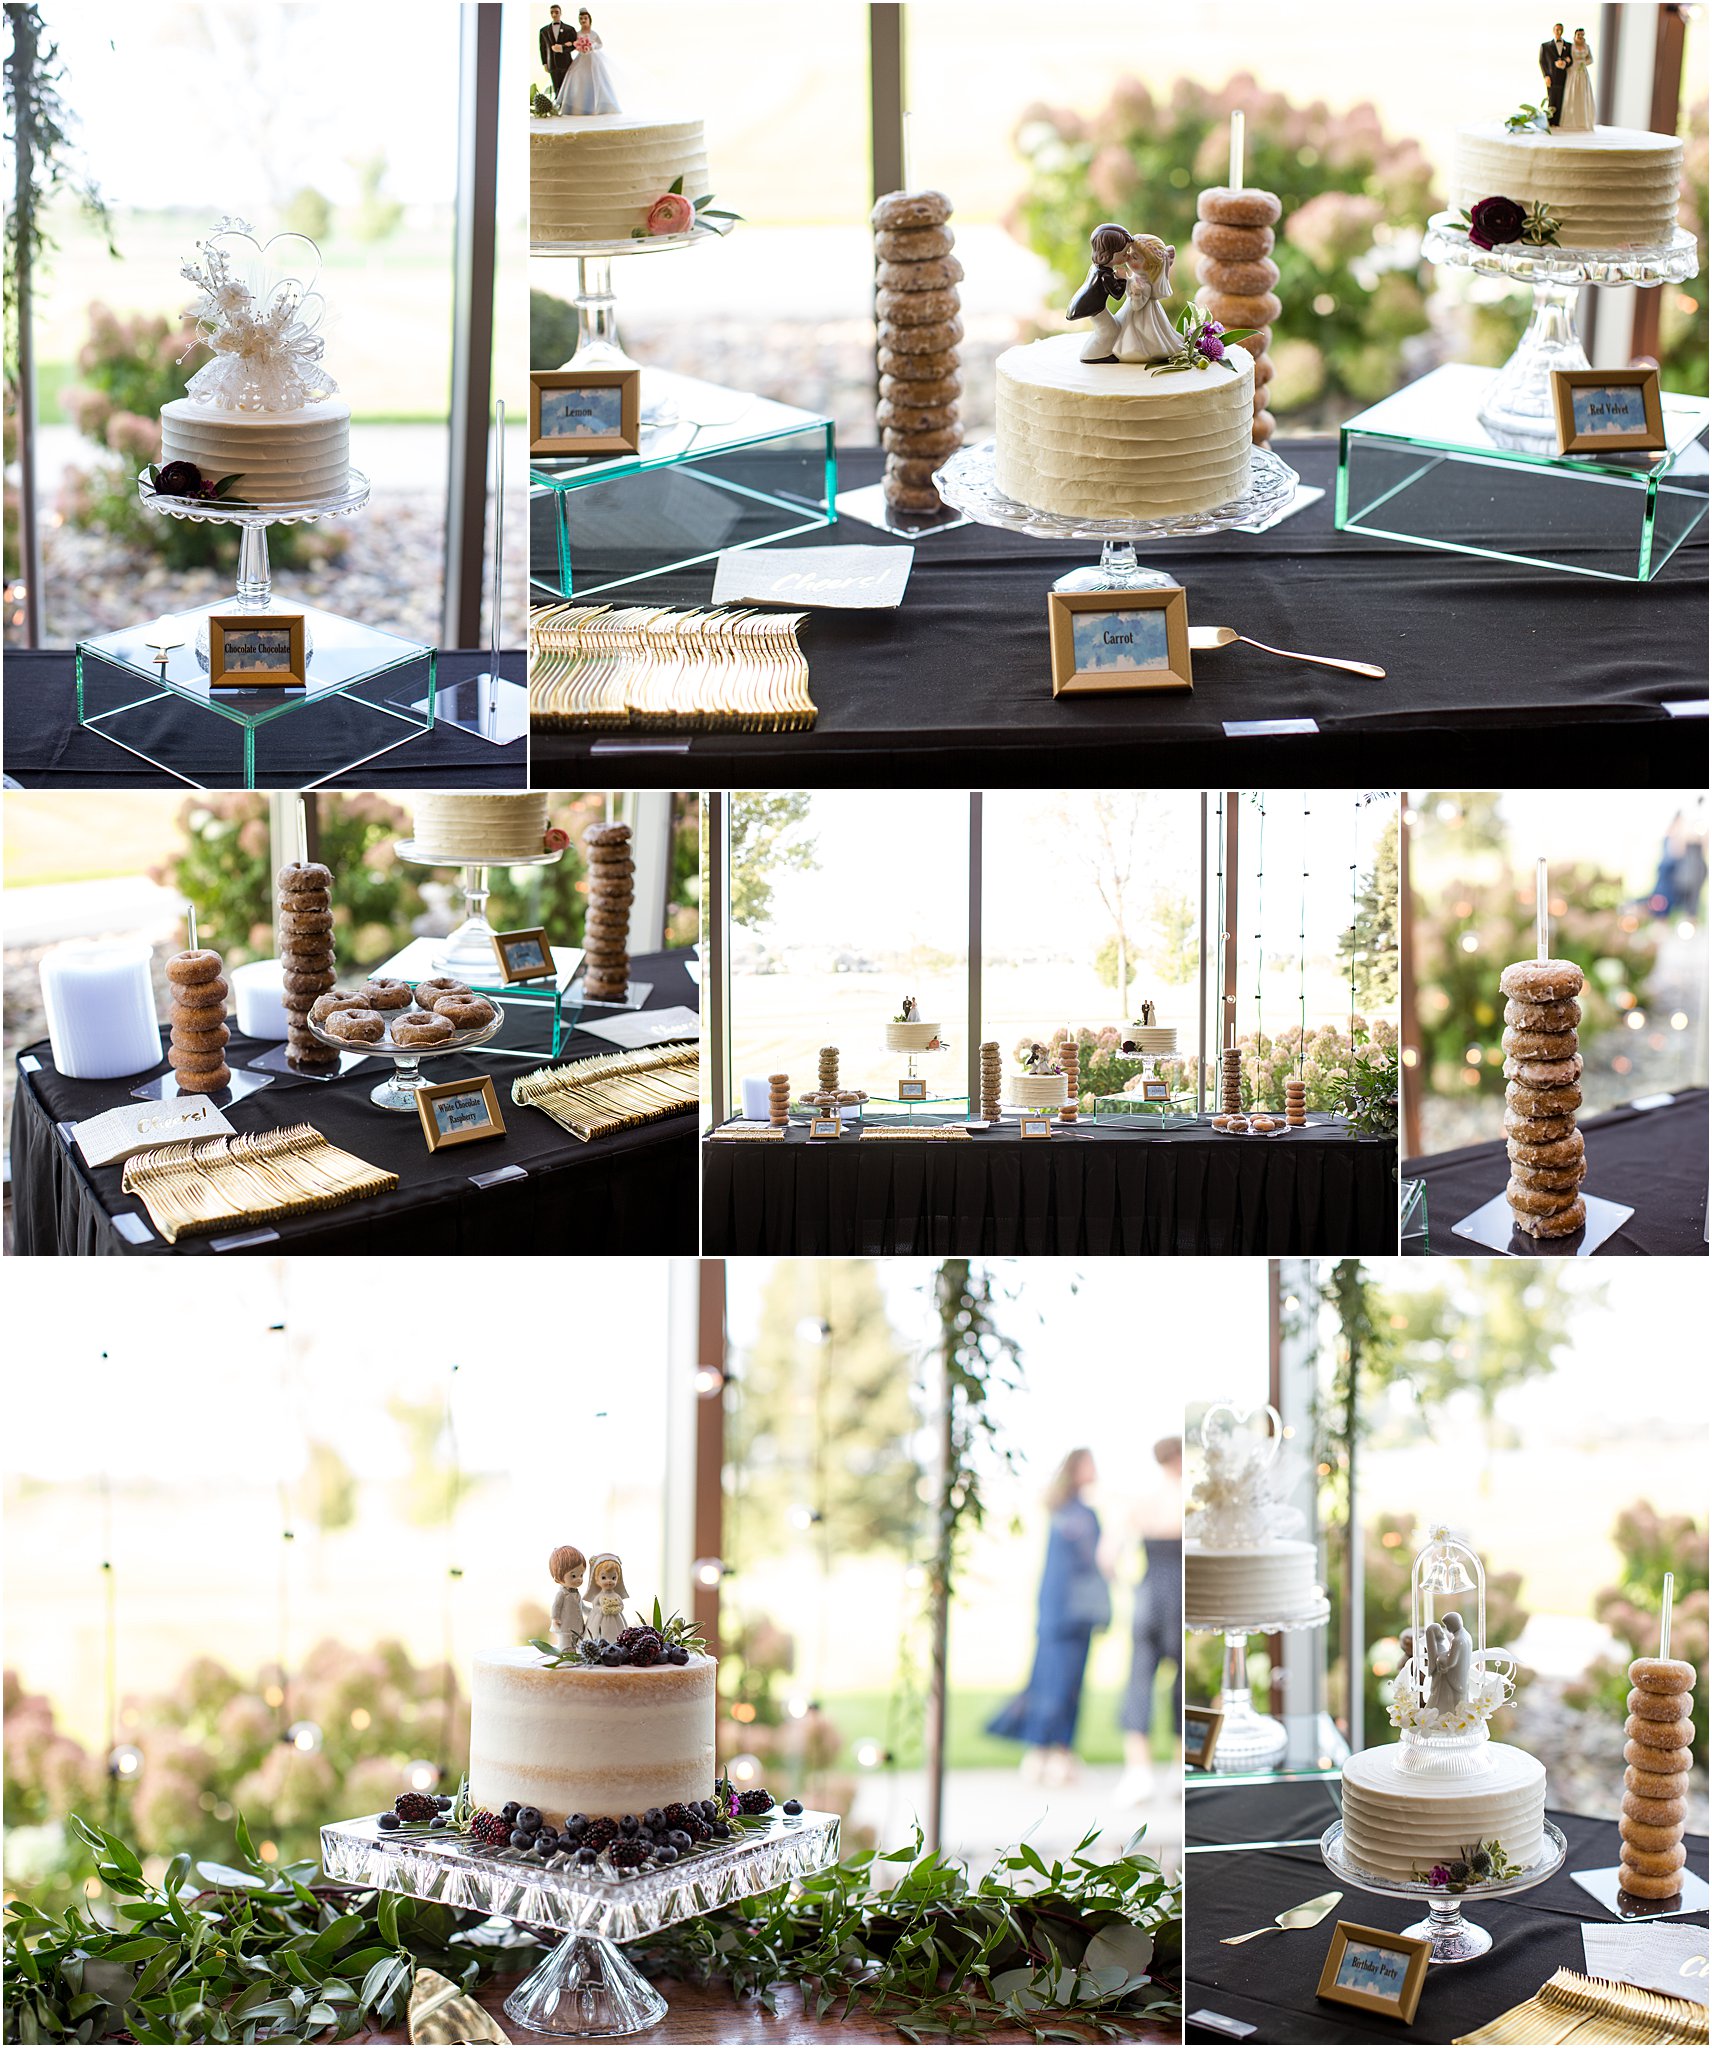 wedding cake table decor using vintage cake toppers